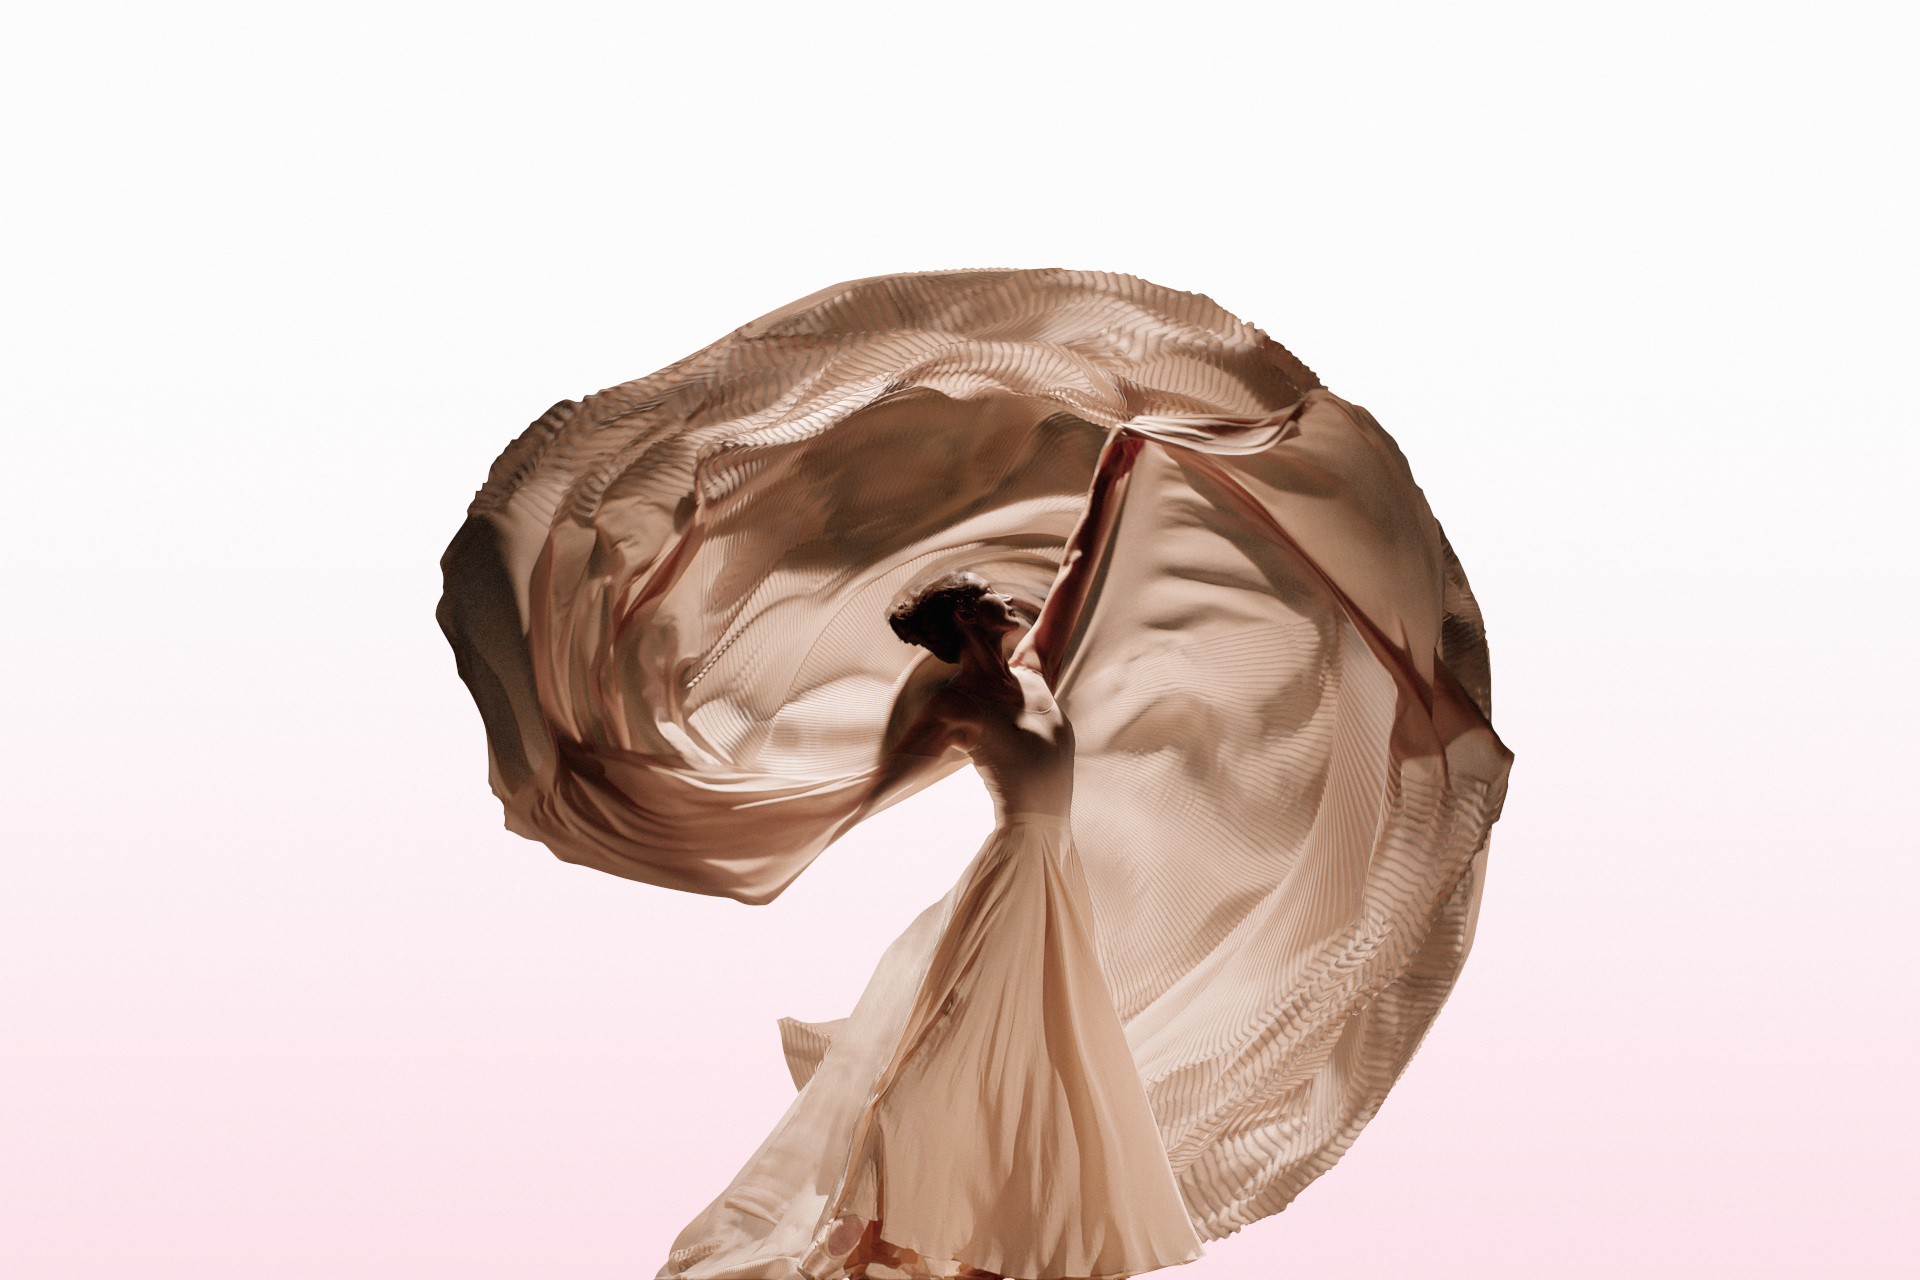 Lauren Cuthbertson pulling floaty fabric above her head in pink setting